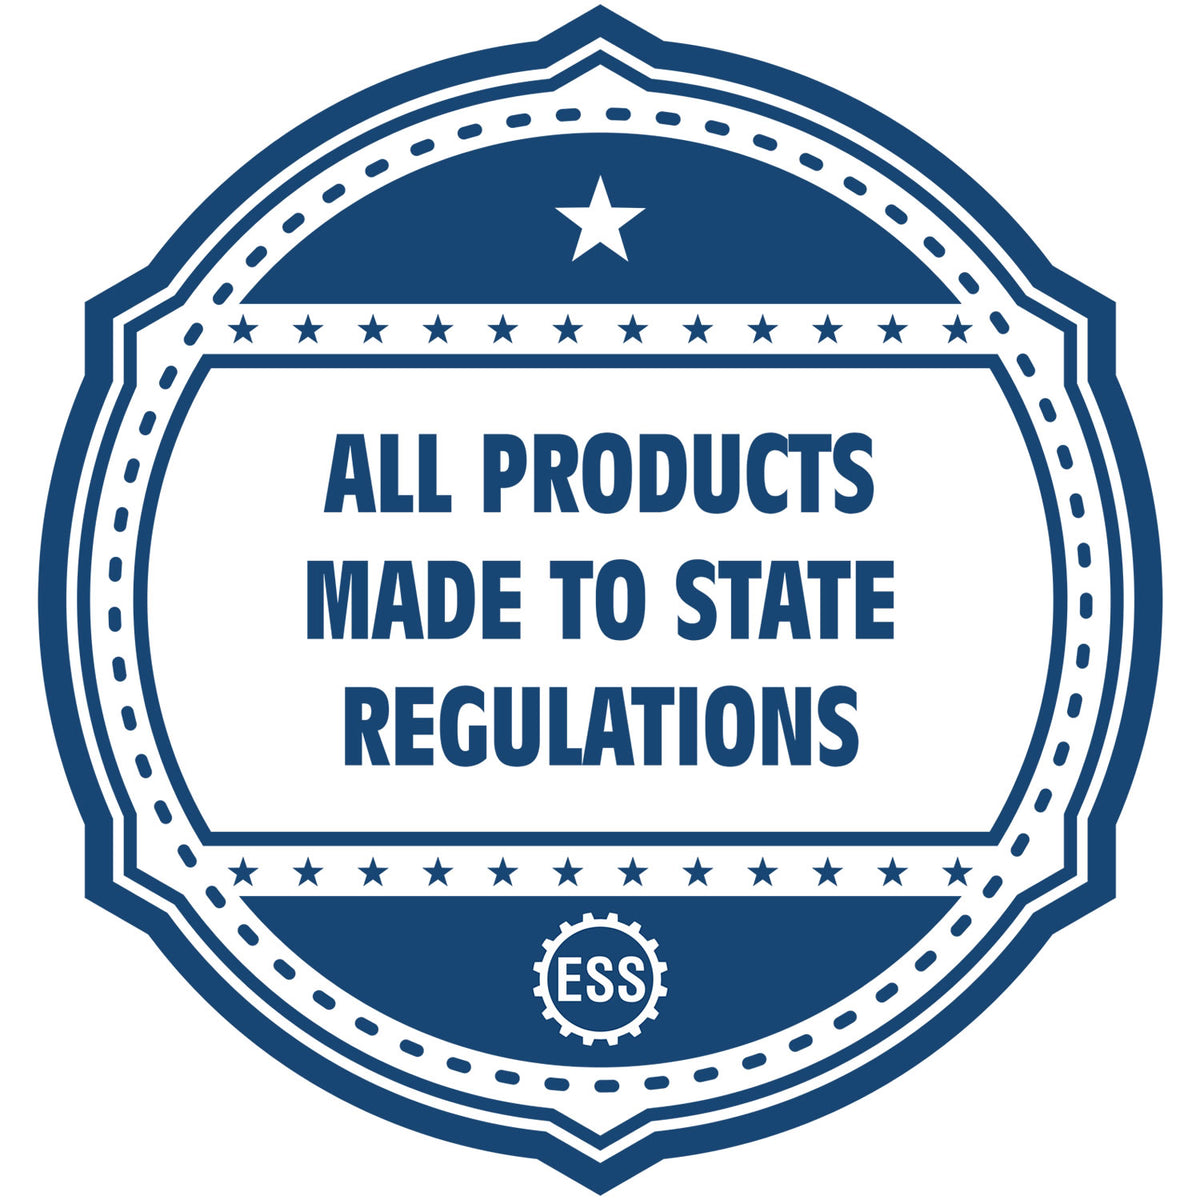 An icon or badge element for the Slim Pre-Inked Arkansas Land Surveyor Seal Stamp showing that this product is made in compliance with state regulations.